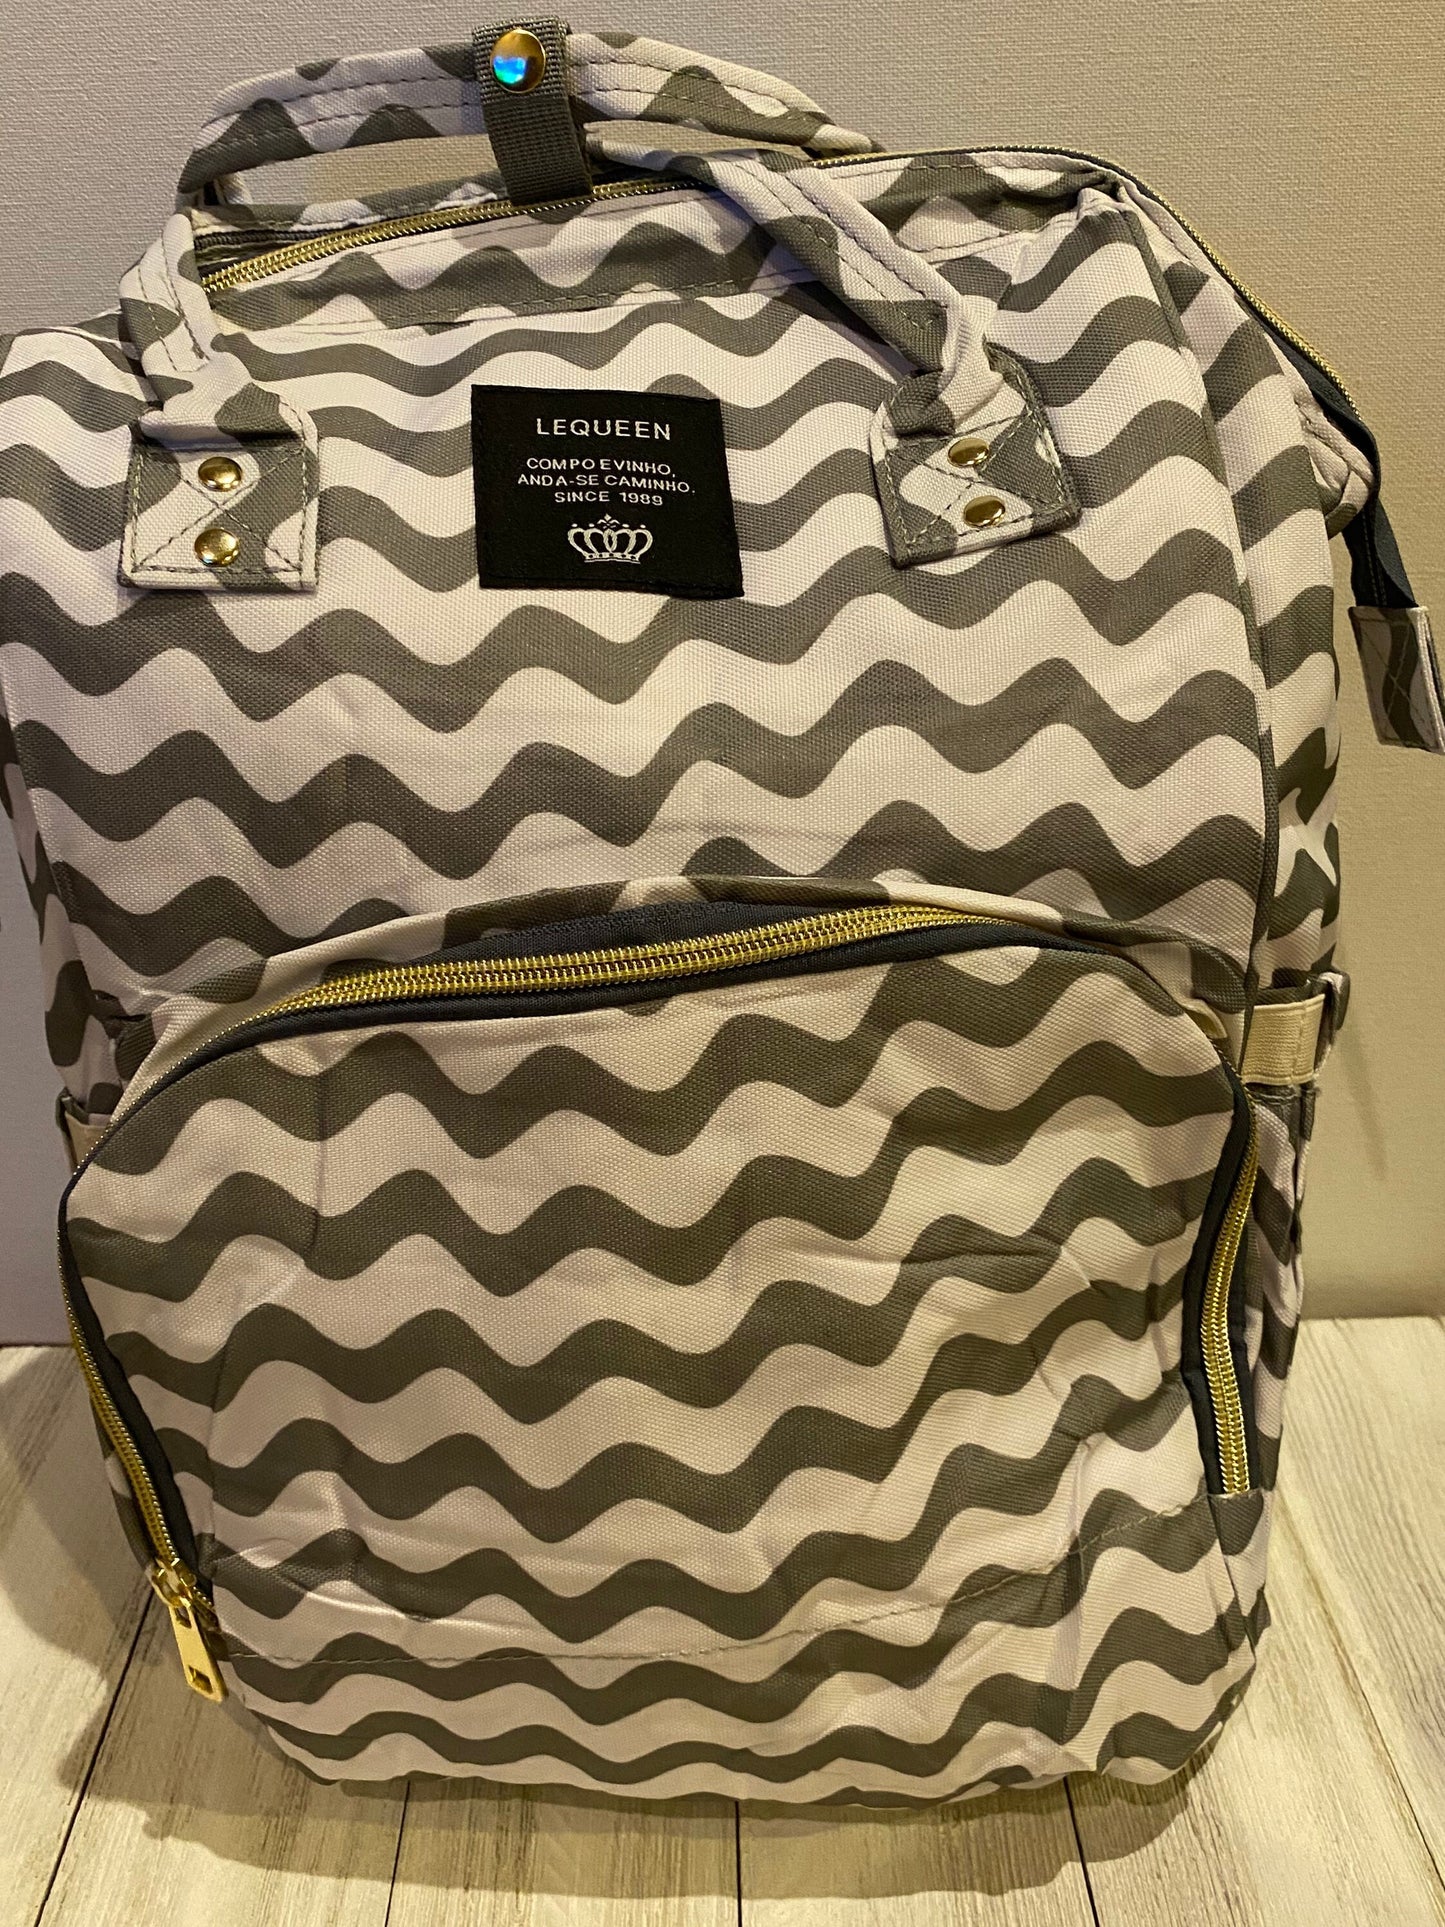 Personlized Diaper Bags, Insulated, Baby Gift